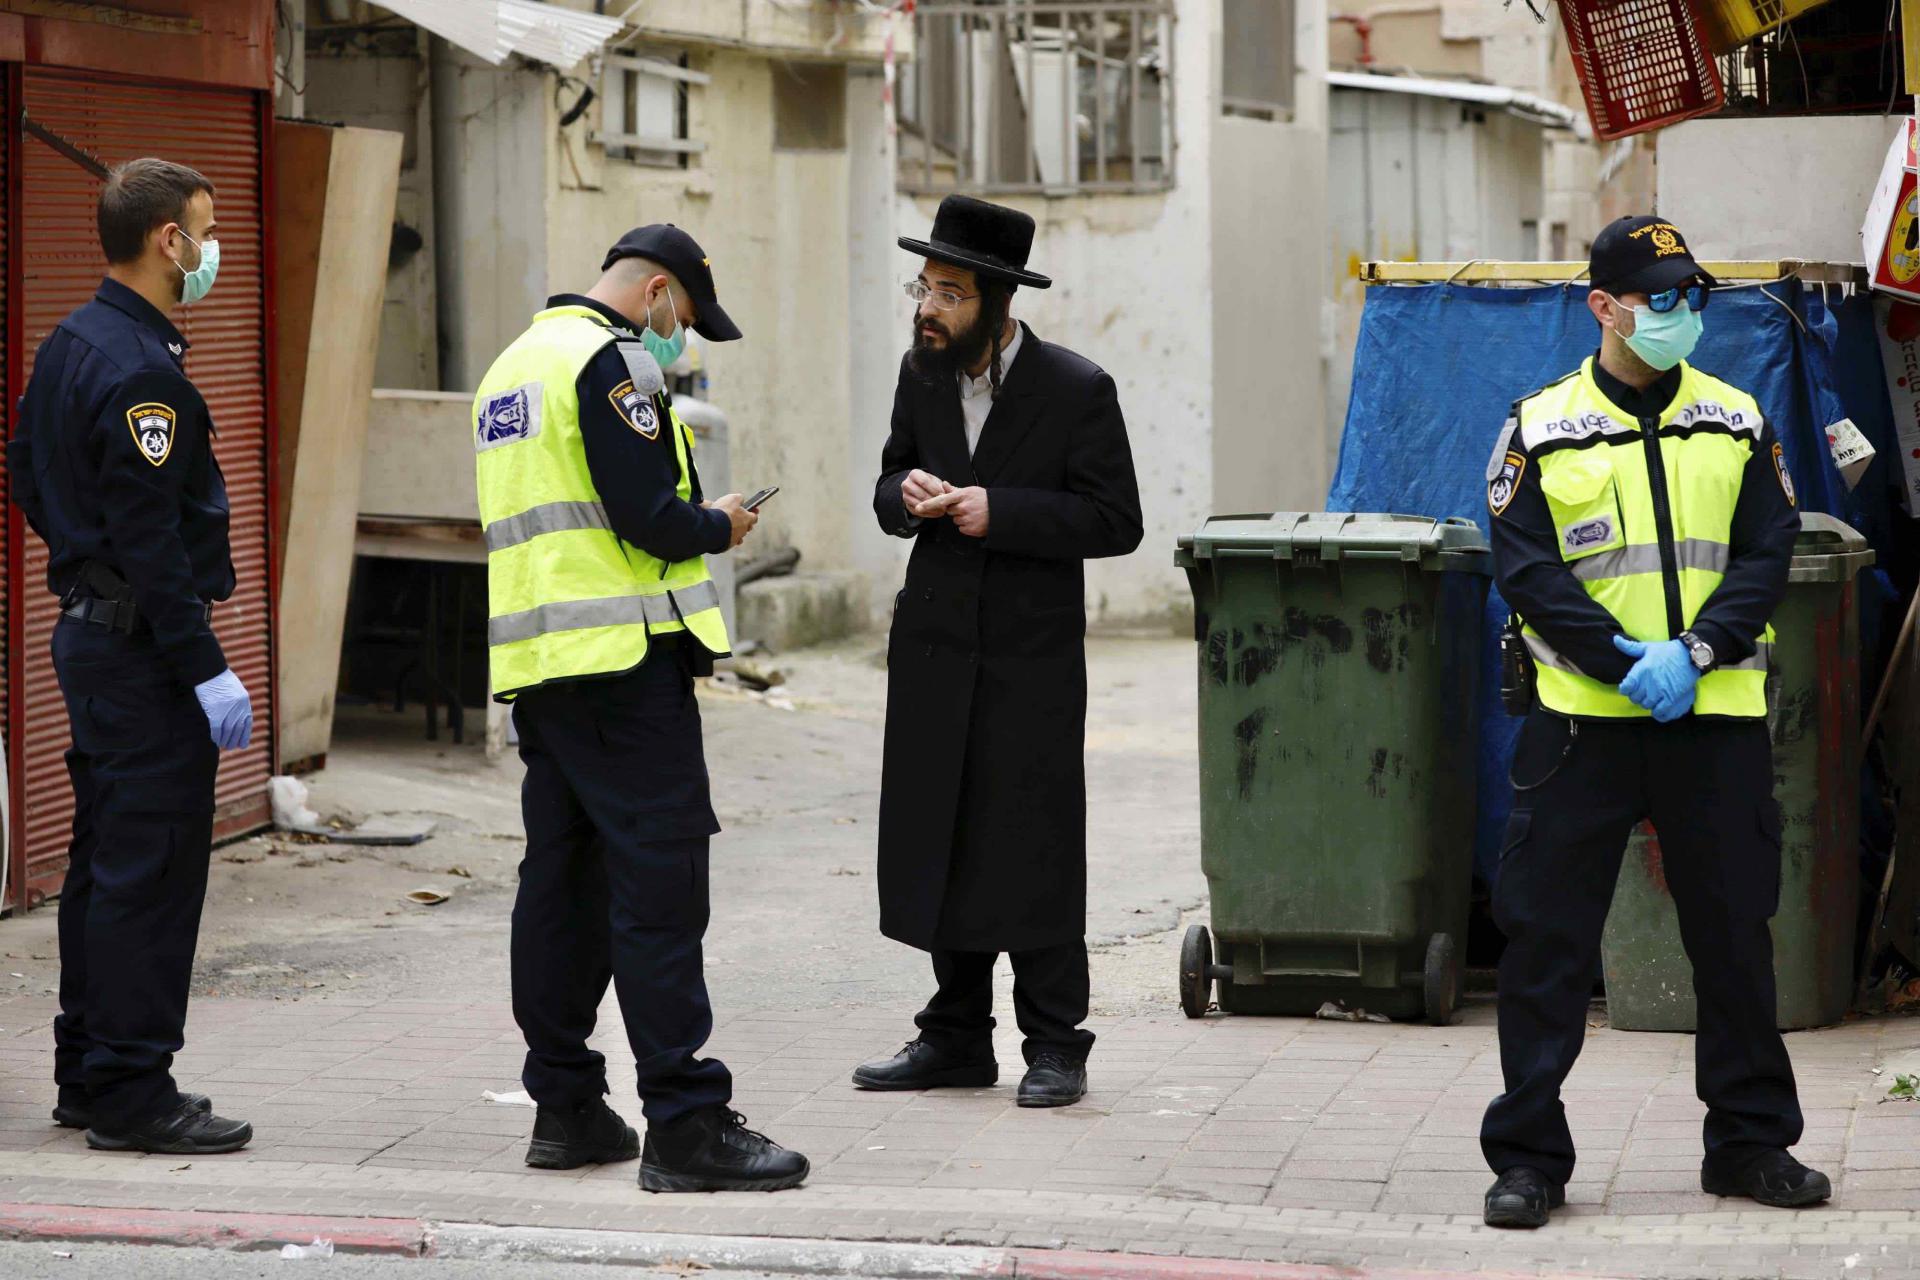 Police in Mea Sharim arrested ultra-Orthodox men who protested the closure of a synagogue there